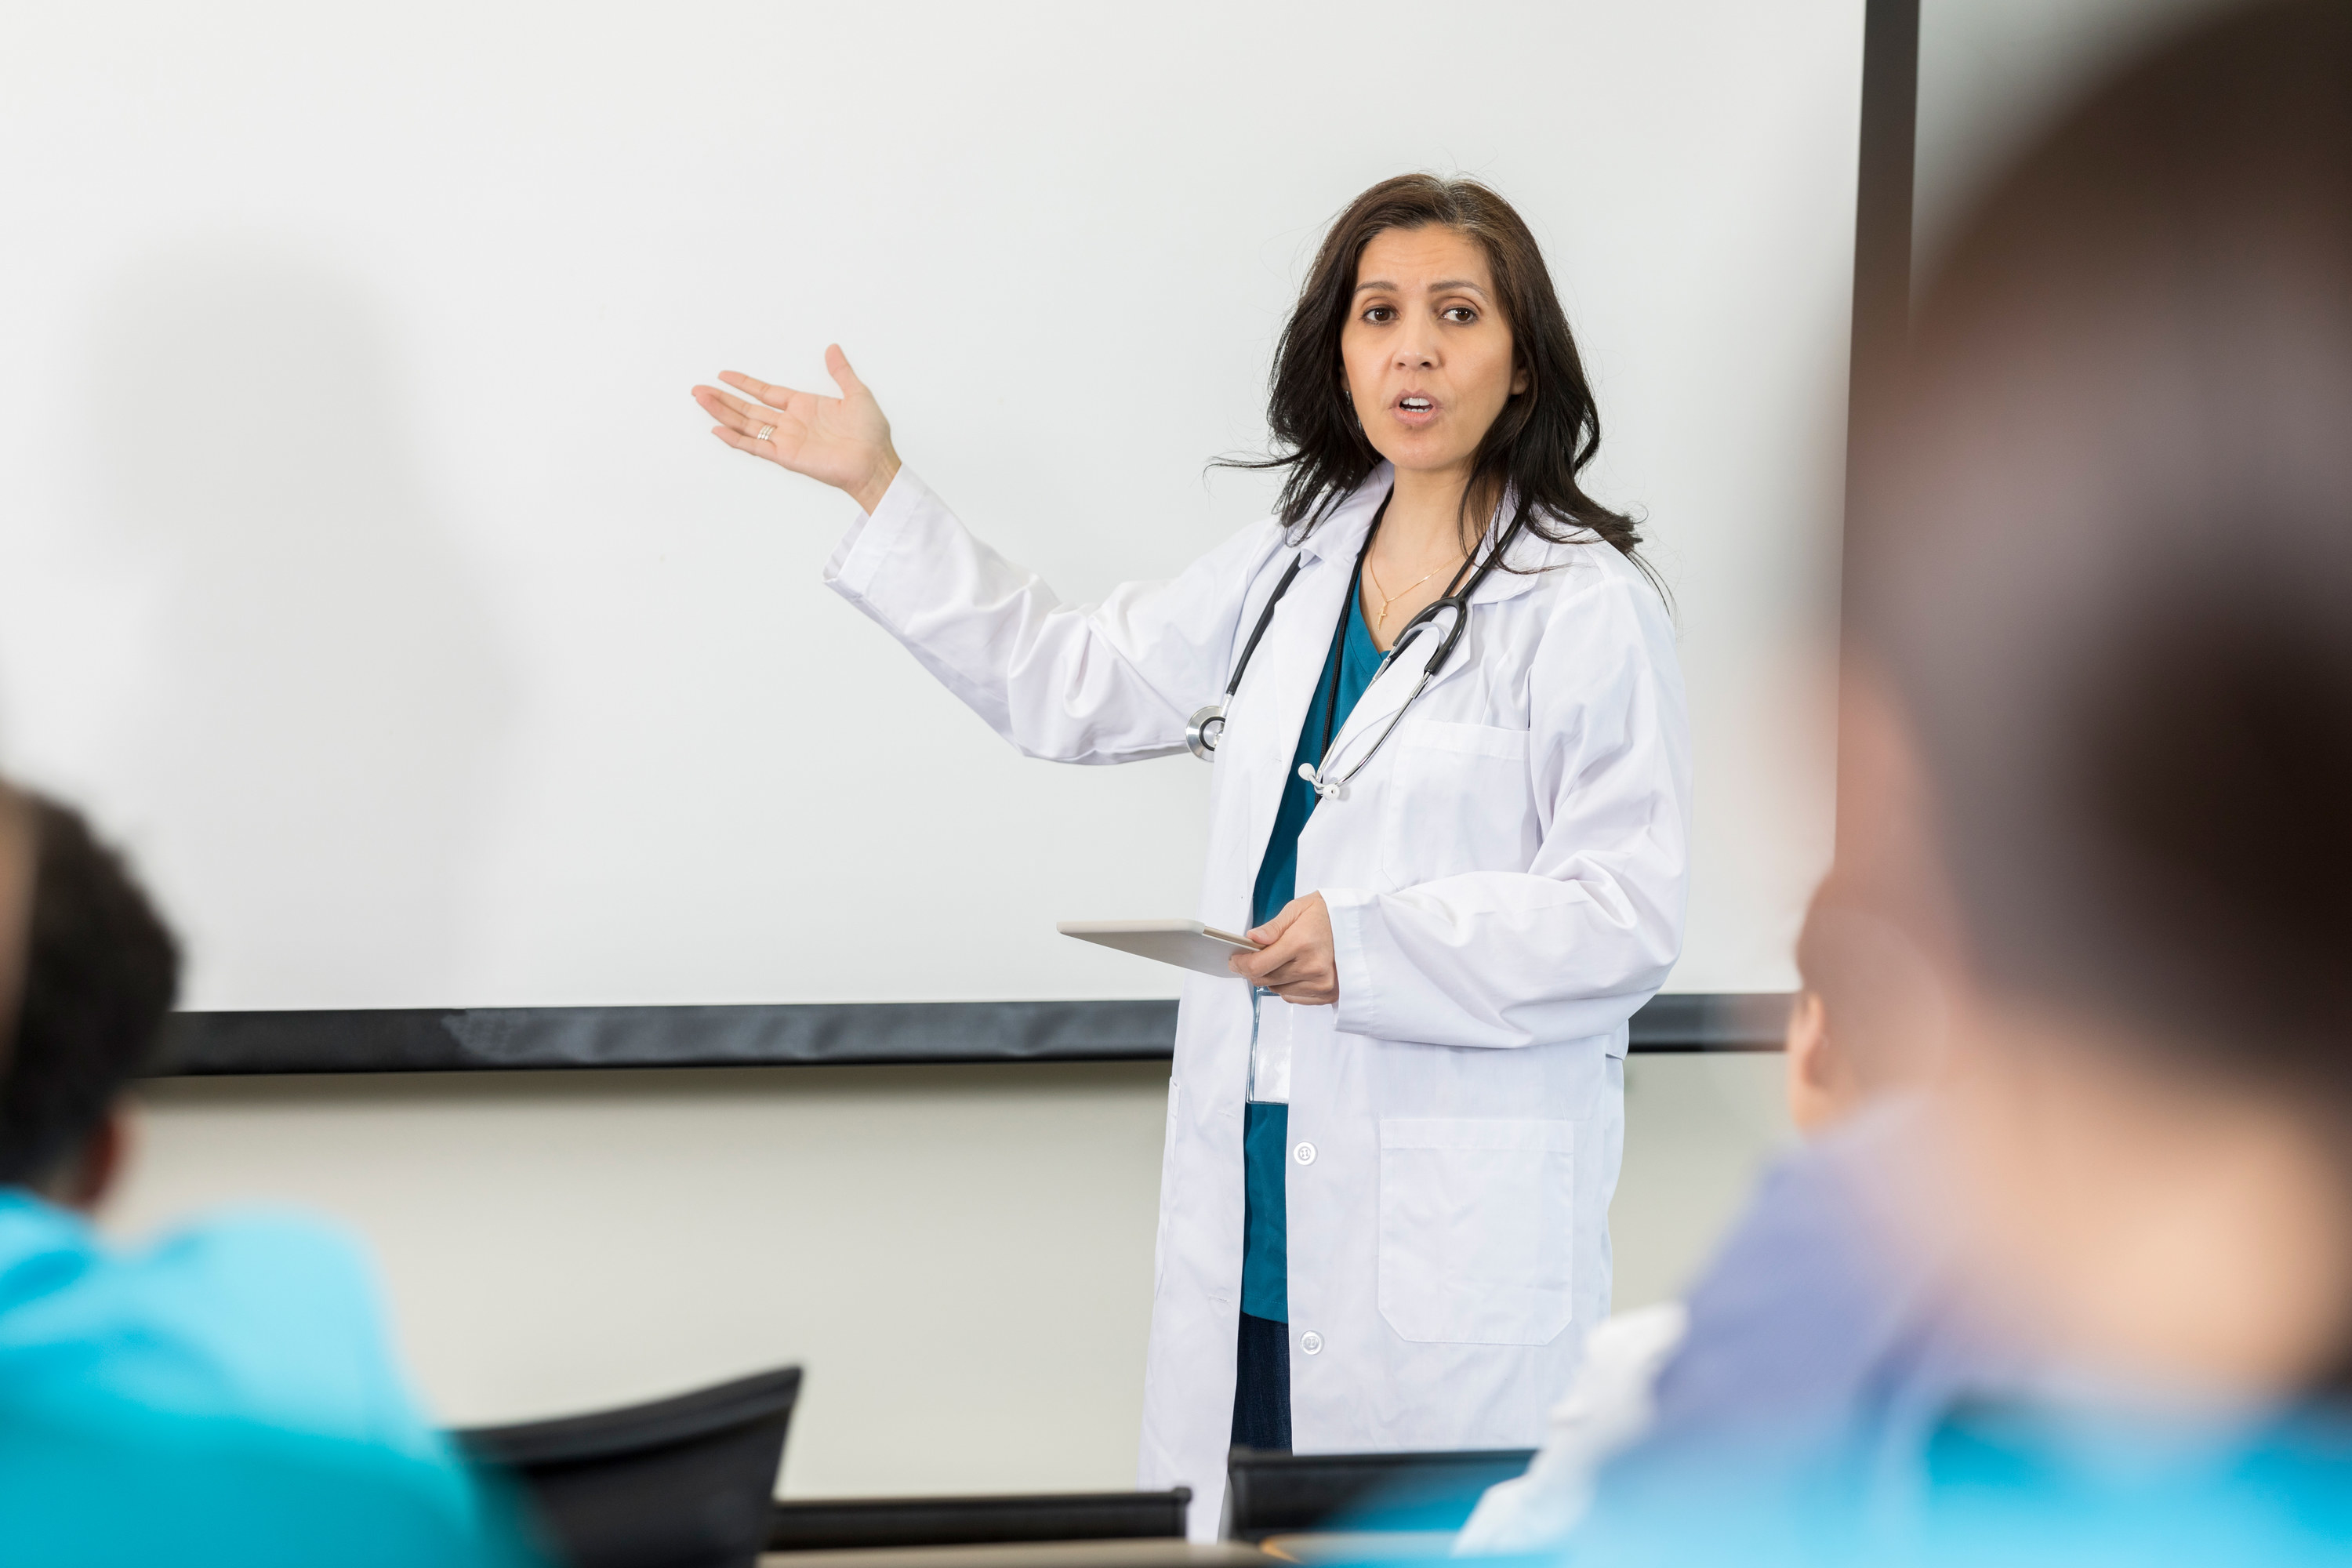 A medical professor points to a white board while giving a lecture